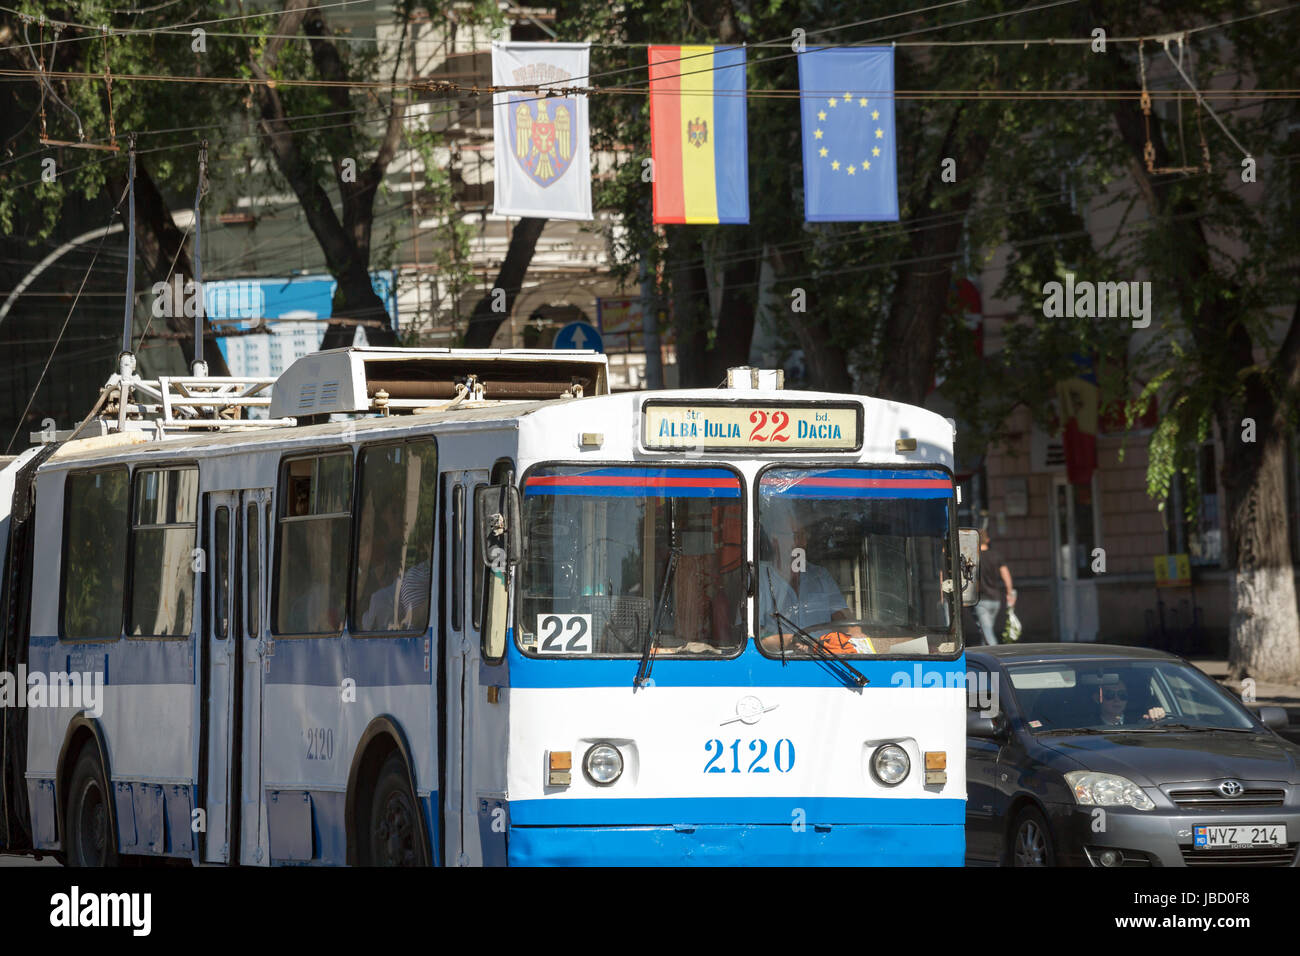 01.09.2016, Moldova, Chisinau, Chisinau - Trolleybus and flag of the Republic of Moldova, the EU flag as well as a flag with the coat of arms of Chisinau next to each other over the Bulevardul Stefan cel Mare si Sint. 00A160901D051CAROEX.JPG - NOT for SALE in G E R M A N Y, A U S T R I A, S W I T Z E R L A N D [MODEL RELEASE: NO, PROPERTY RELEASE: NO (c) caro photo agency / Bastian, http://www.caro-images.pl, info@carofoto.pl - In case of using the picture for any purposes, please contact the agency - the picture is subject to royalty!] Stock Photo